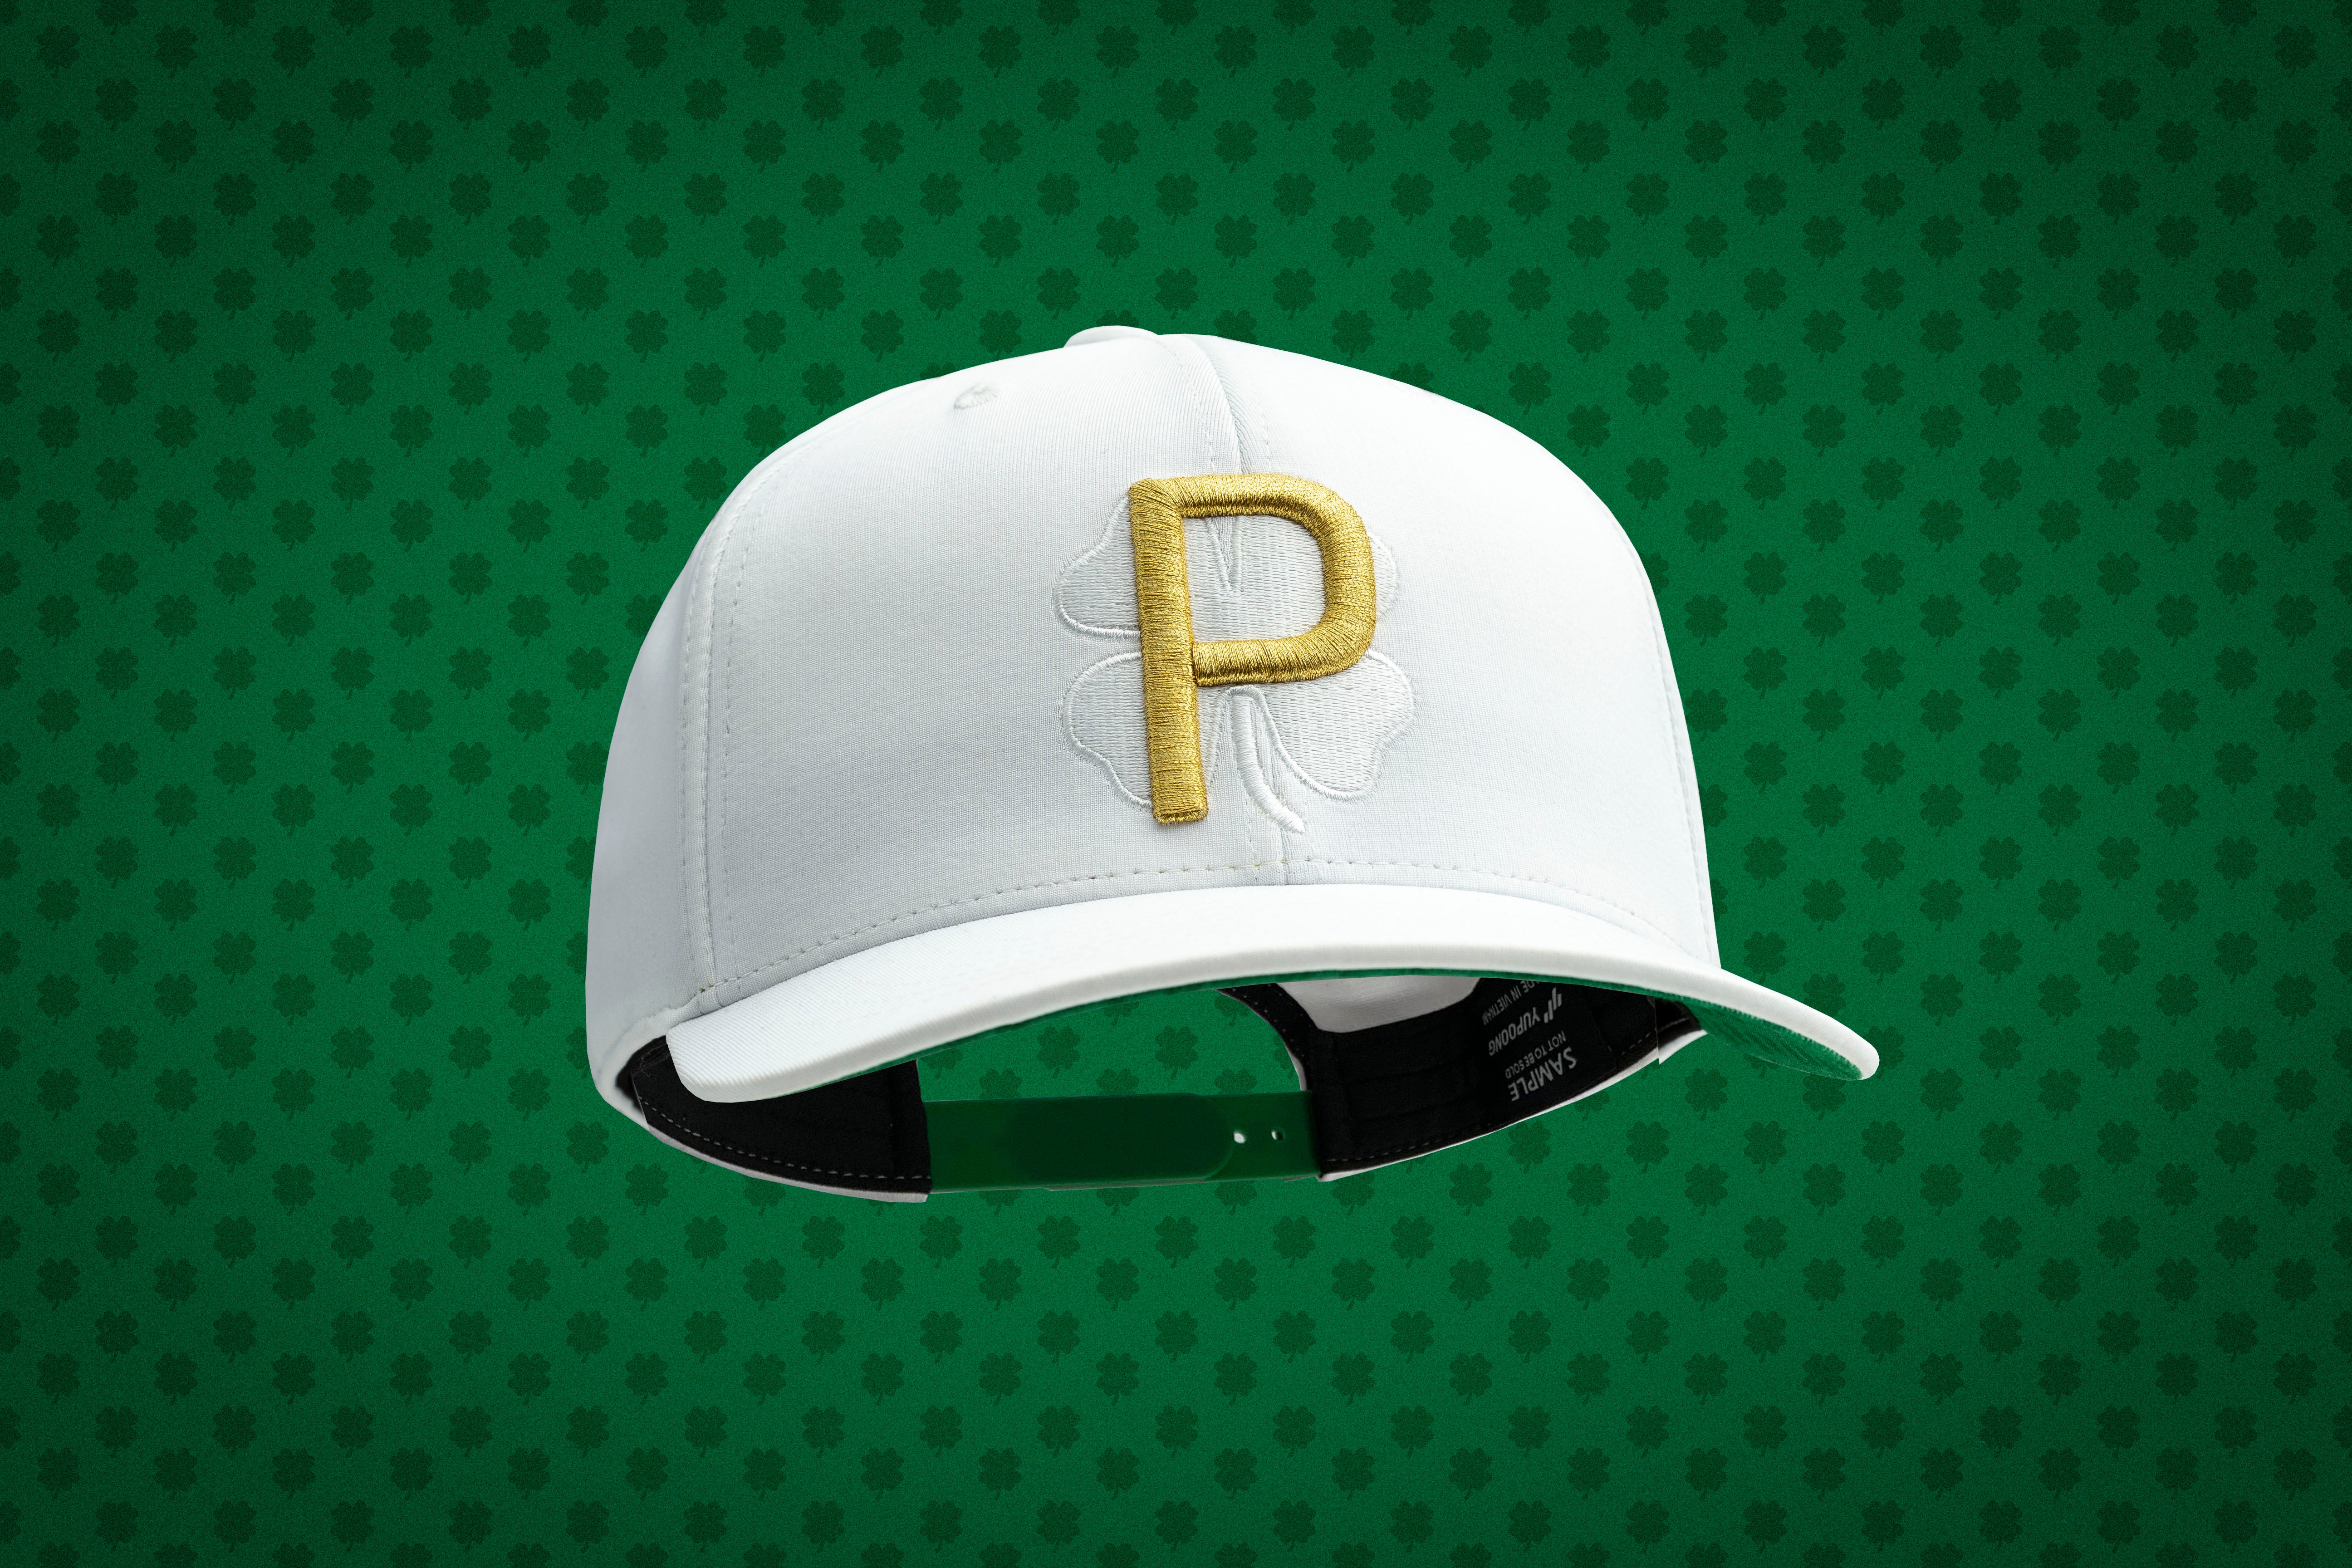 A closer look at Rickie Fowler's special edition St. Patrick's Day hat.